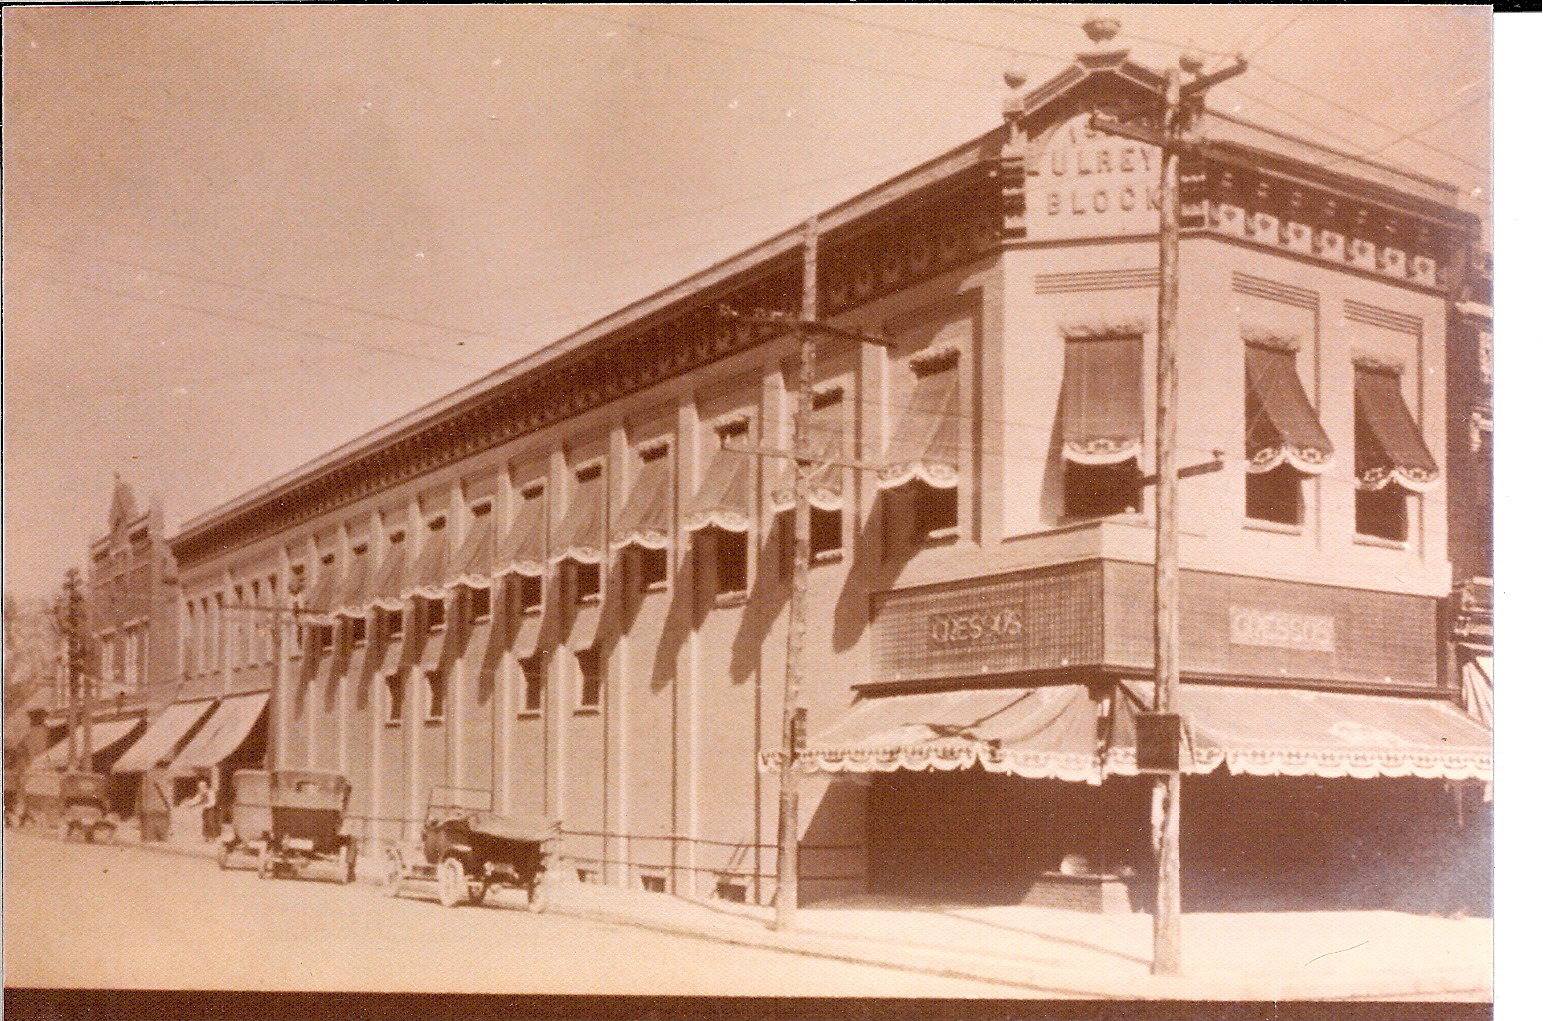 Gresso's Department Store, North Manchester